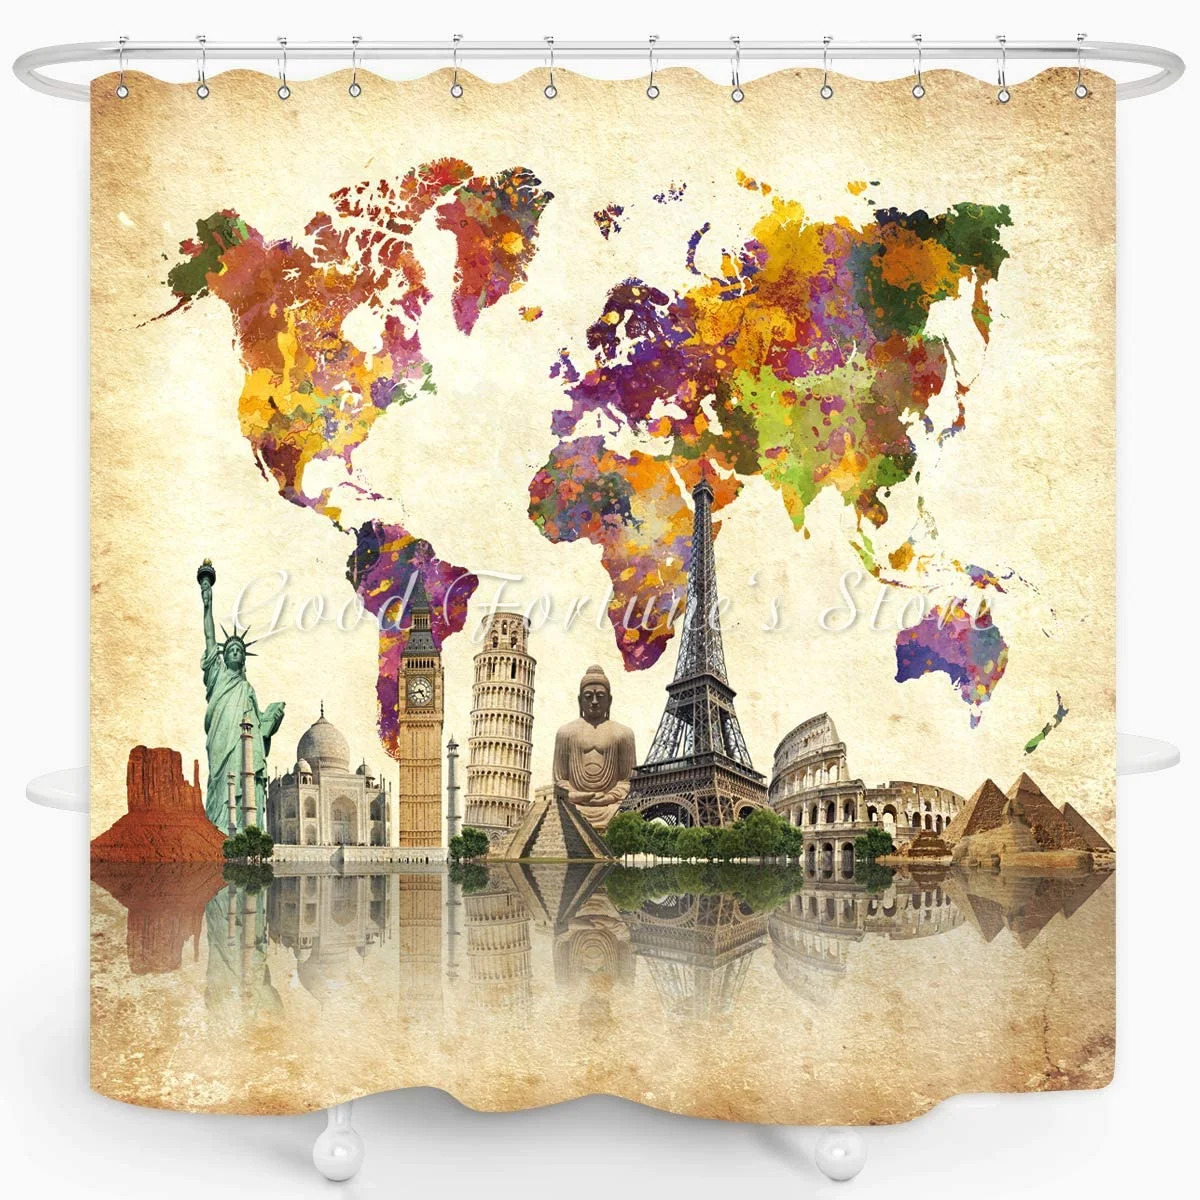 

Vintage World Maps And Famous Cultural Landmarks, The Statue Of Liberty Eiffel Tower Big Ben, Shower Curtain Bathroom Decoration